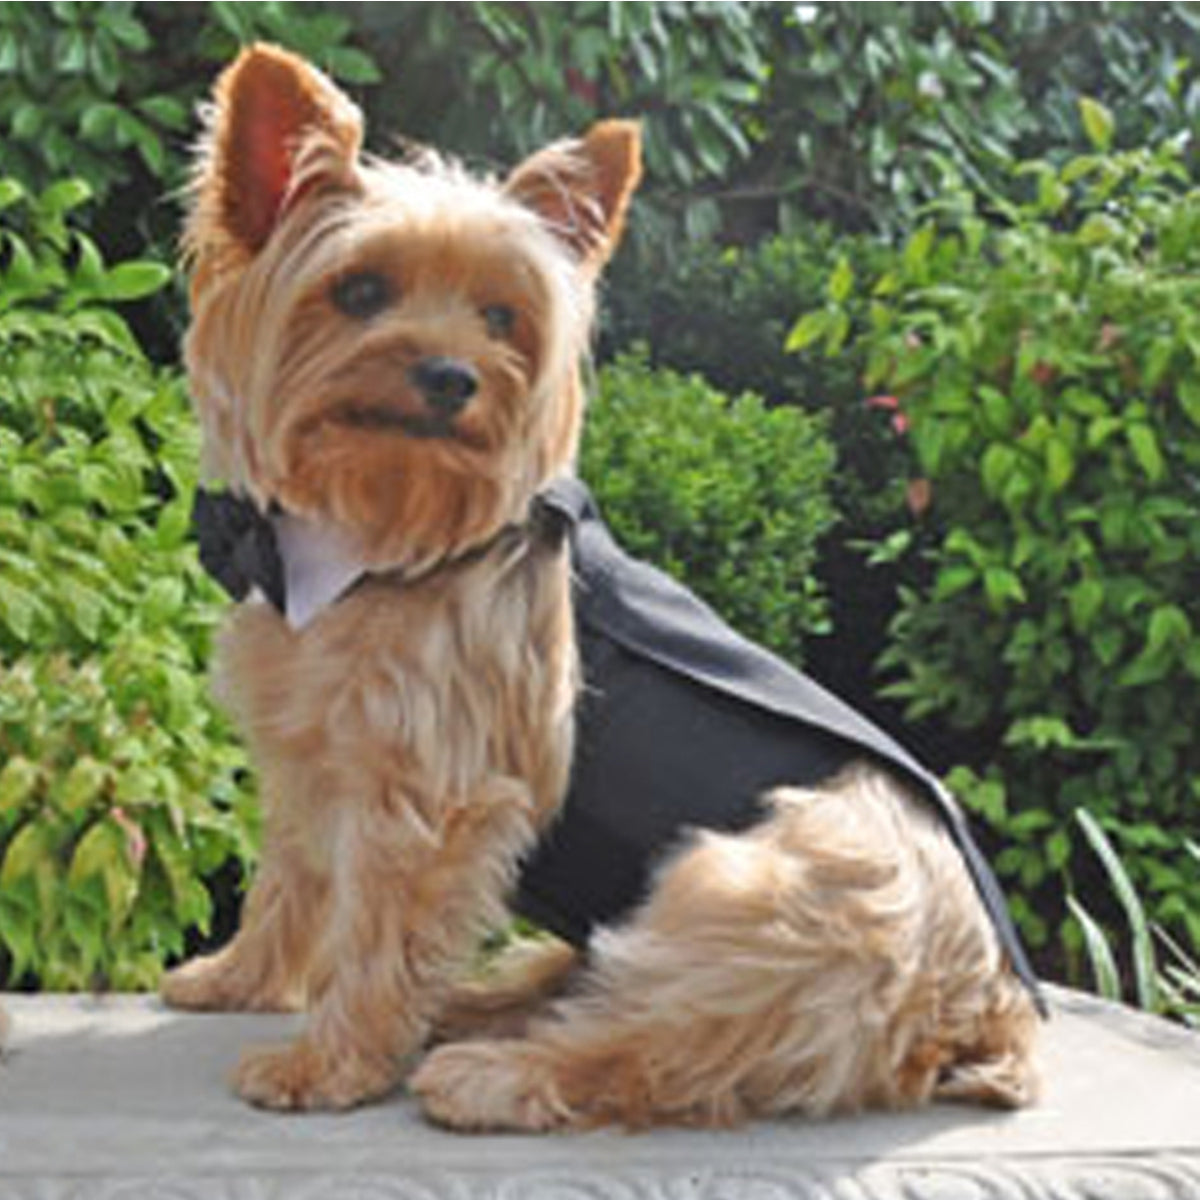 Tuxedo Dog Harness with Bow Tie and Collar | Pawlicious & Company